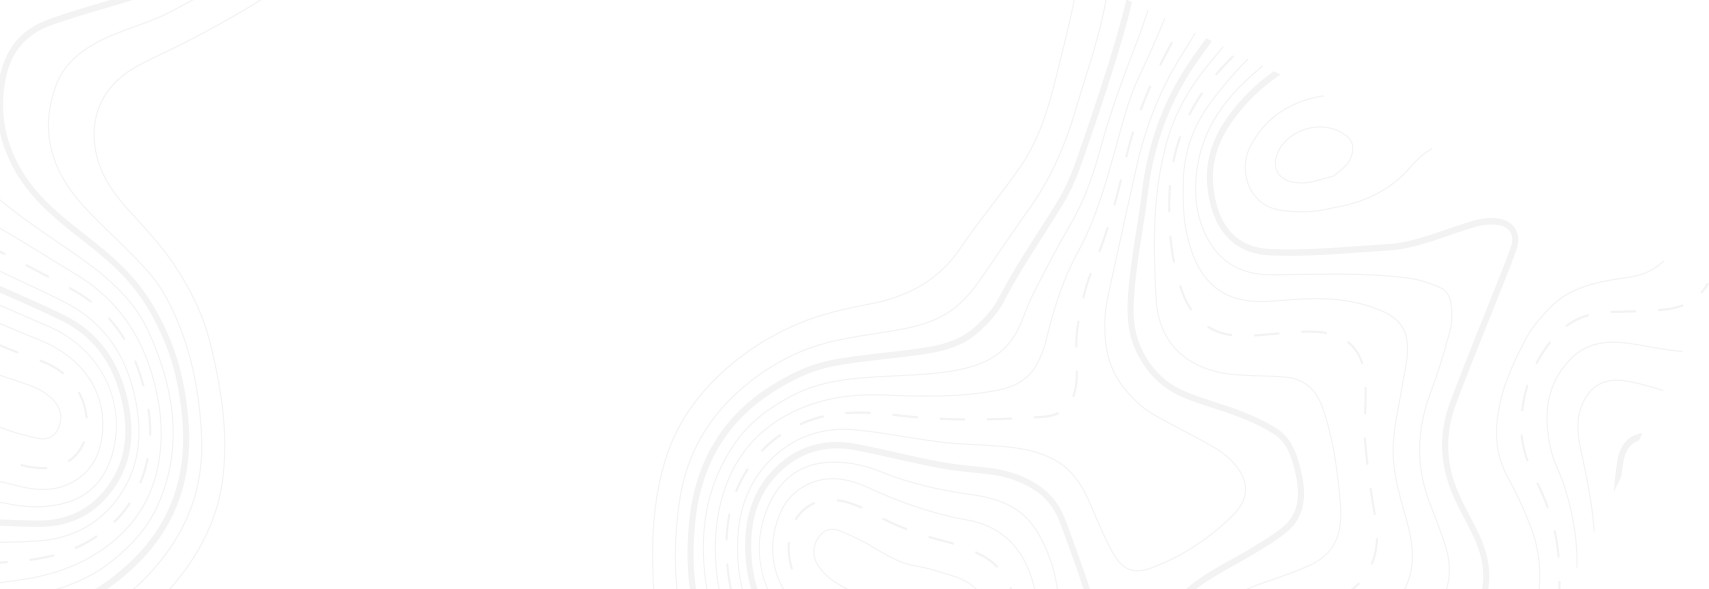 curves background